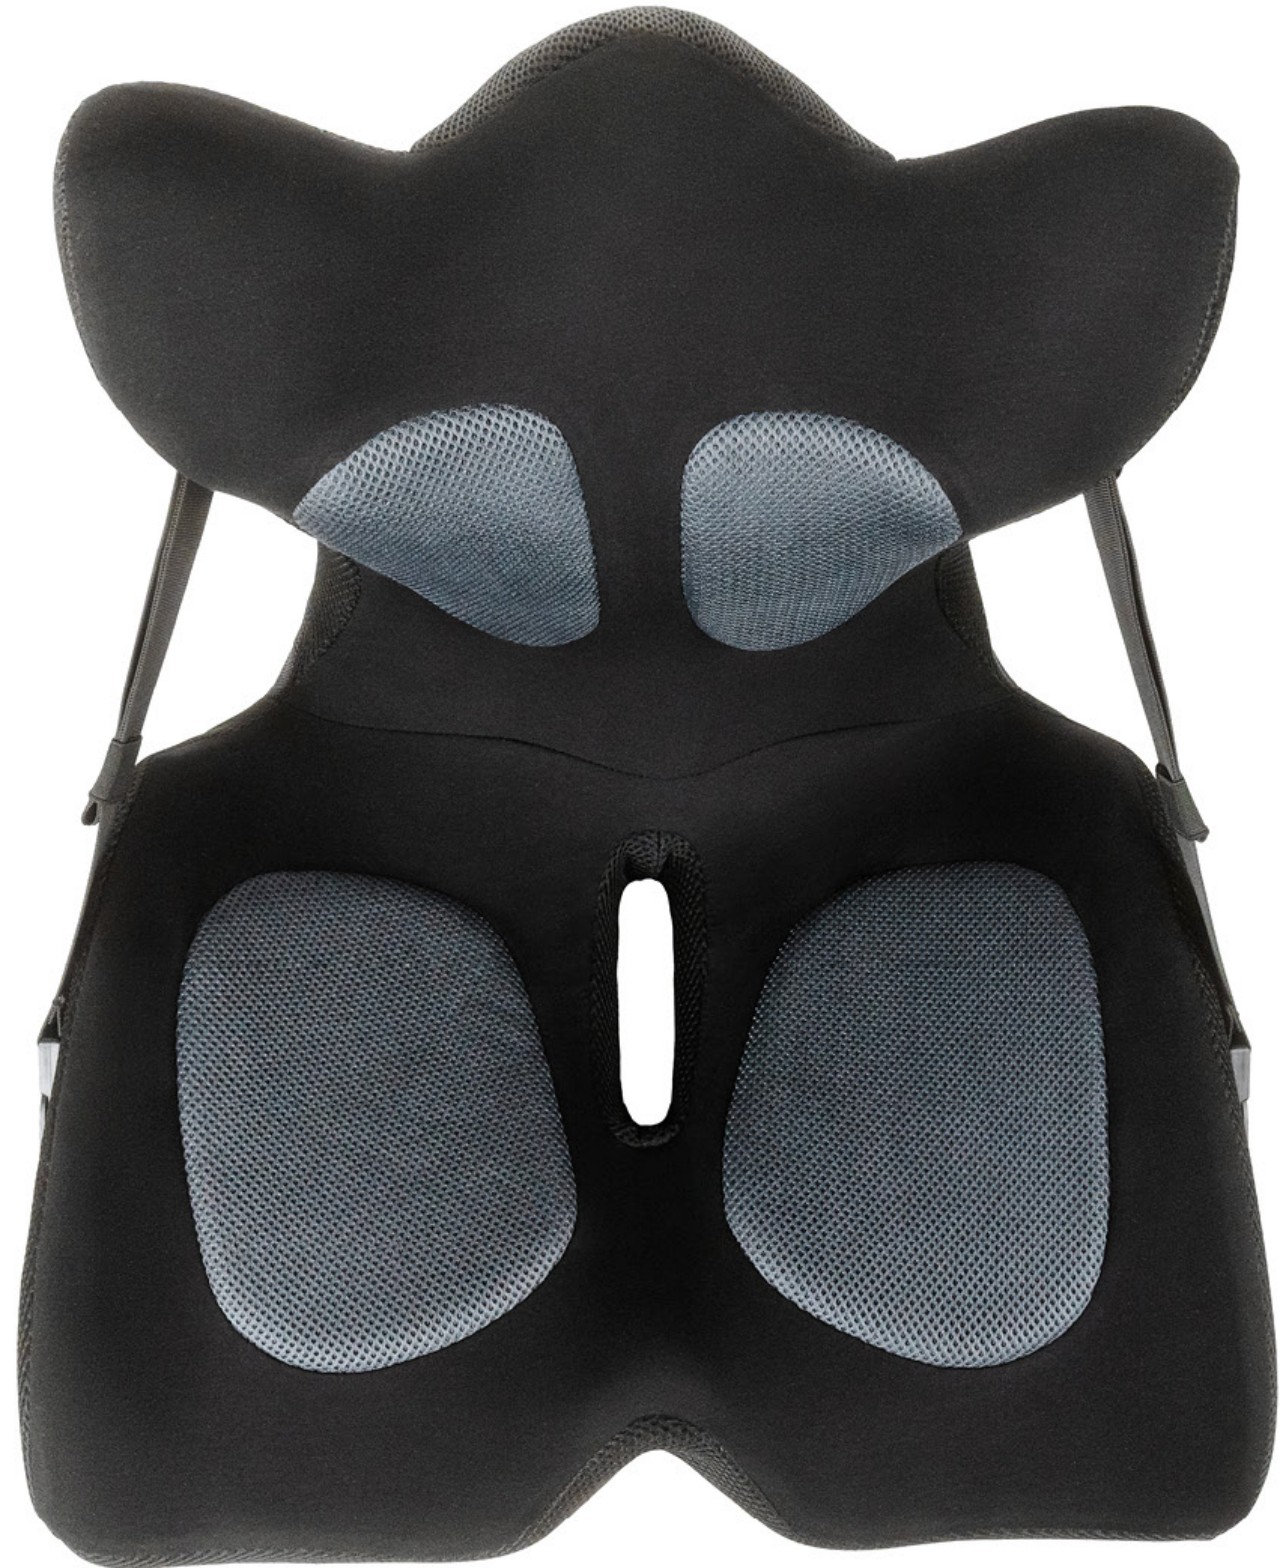 https://www.yankodesign.com/images/design_news/2023/02/ergonomic-seat-cushion-is-a-doctor-designed-lifeline-for-your-lower-back/lifted-lumbar-seat-cushion-9.jpg